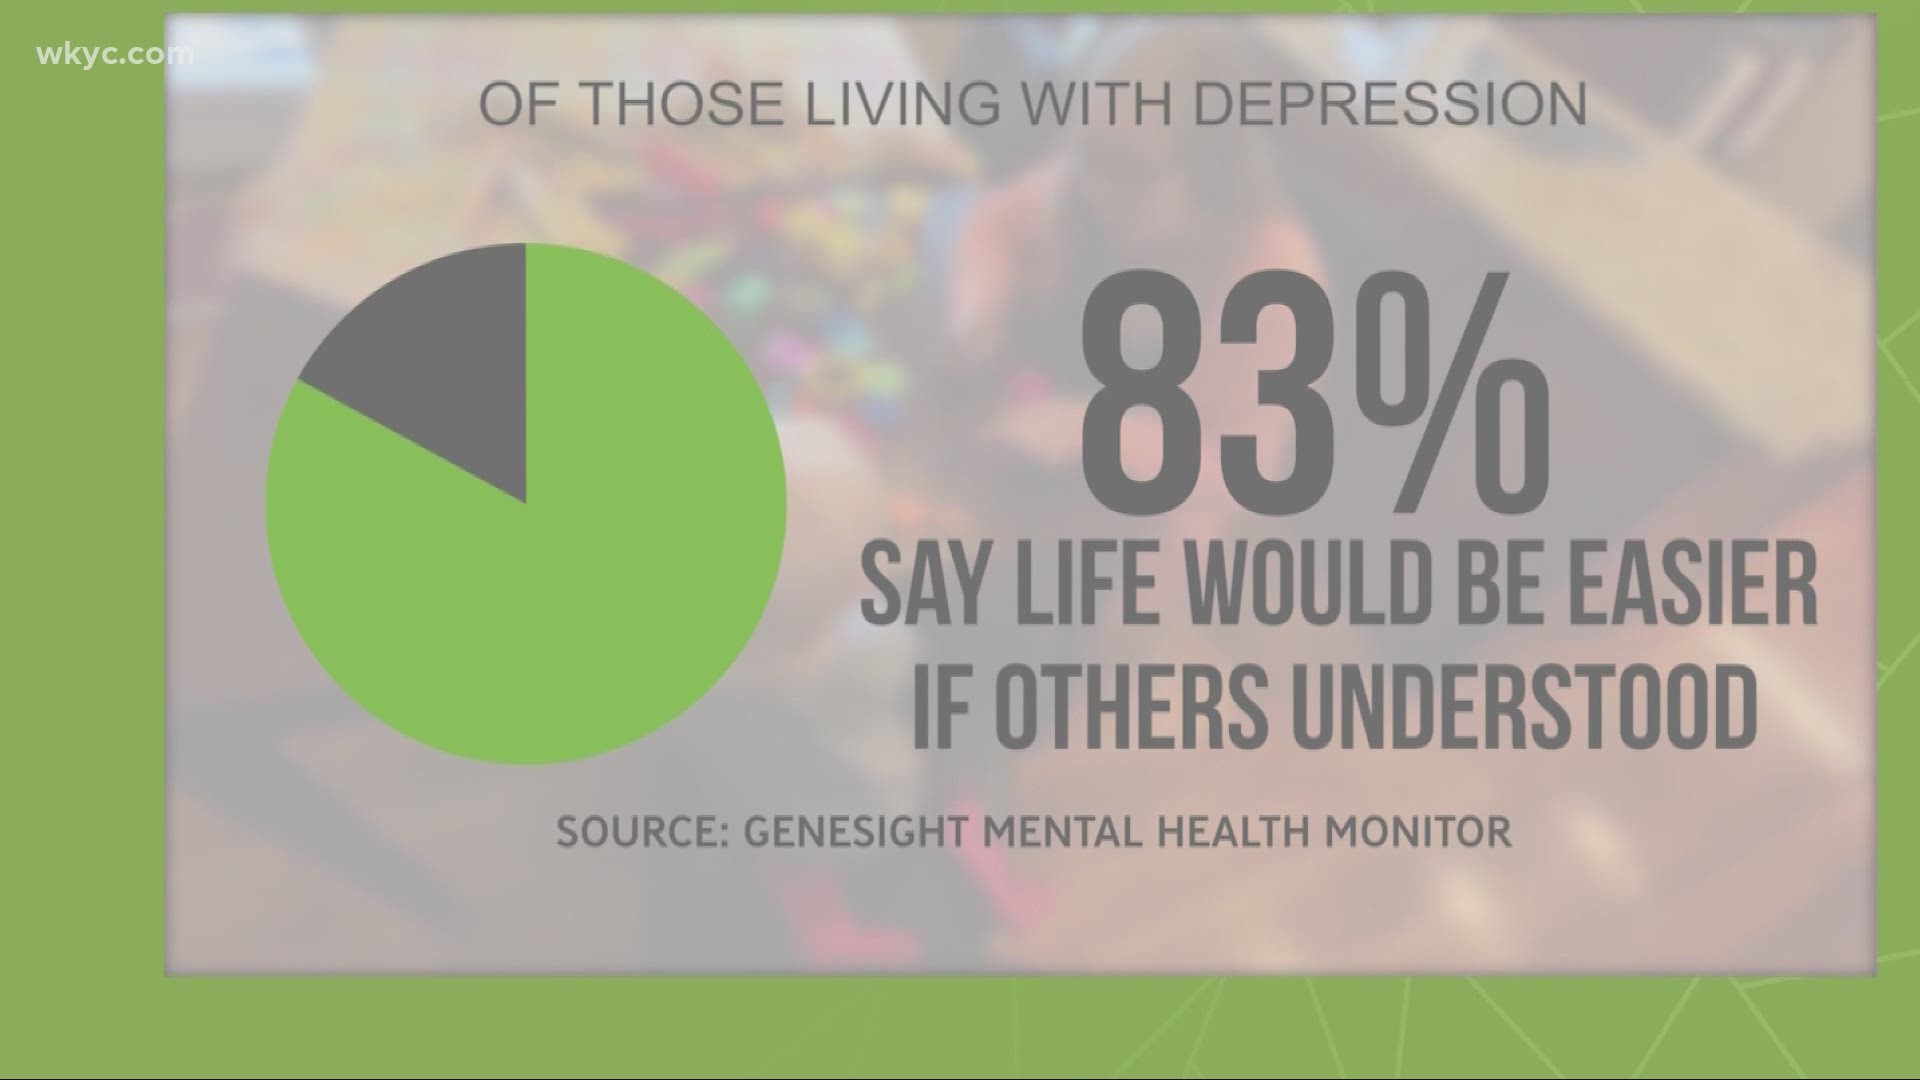 Senior health correspondent Monica Robins reports on a new study, showing adults are not as aware of depression as they may think.